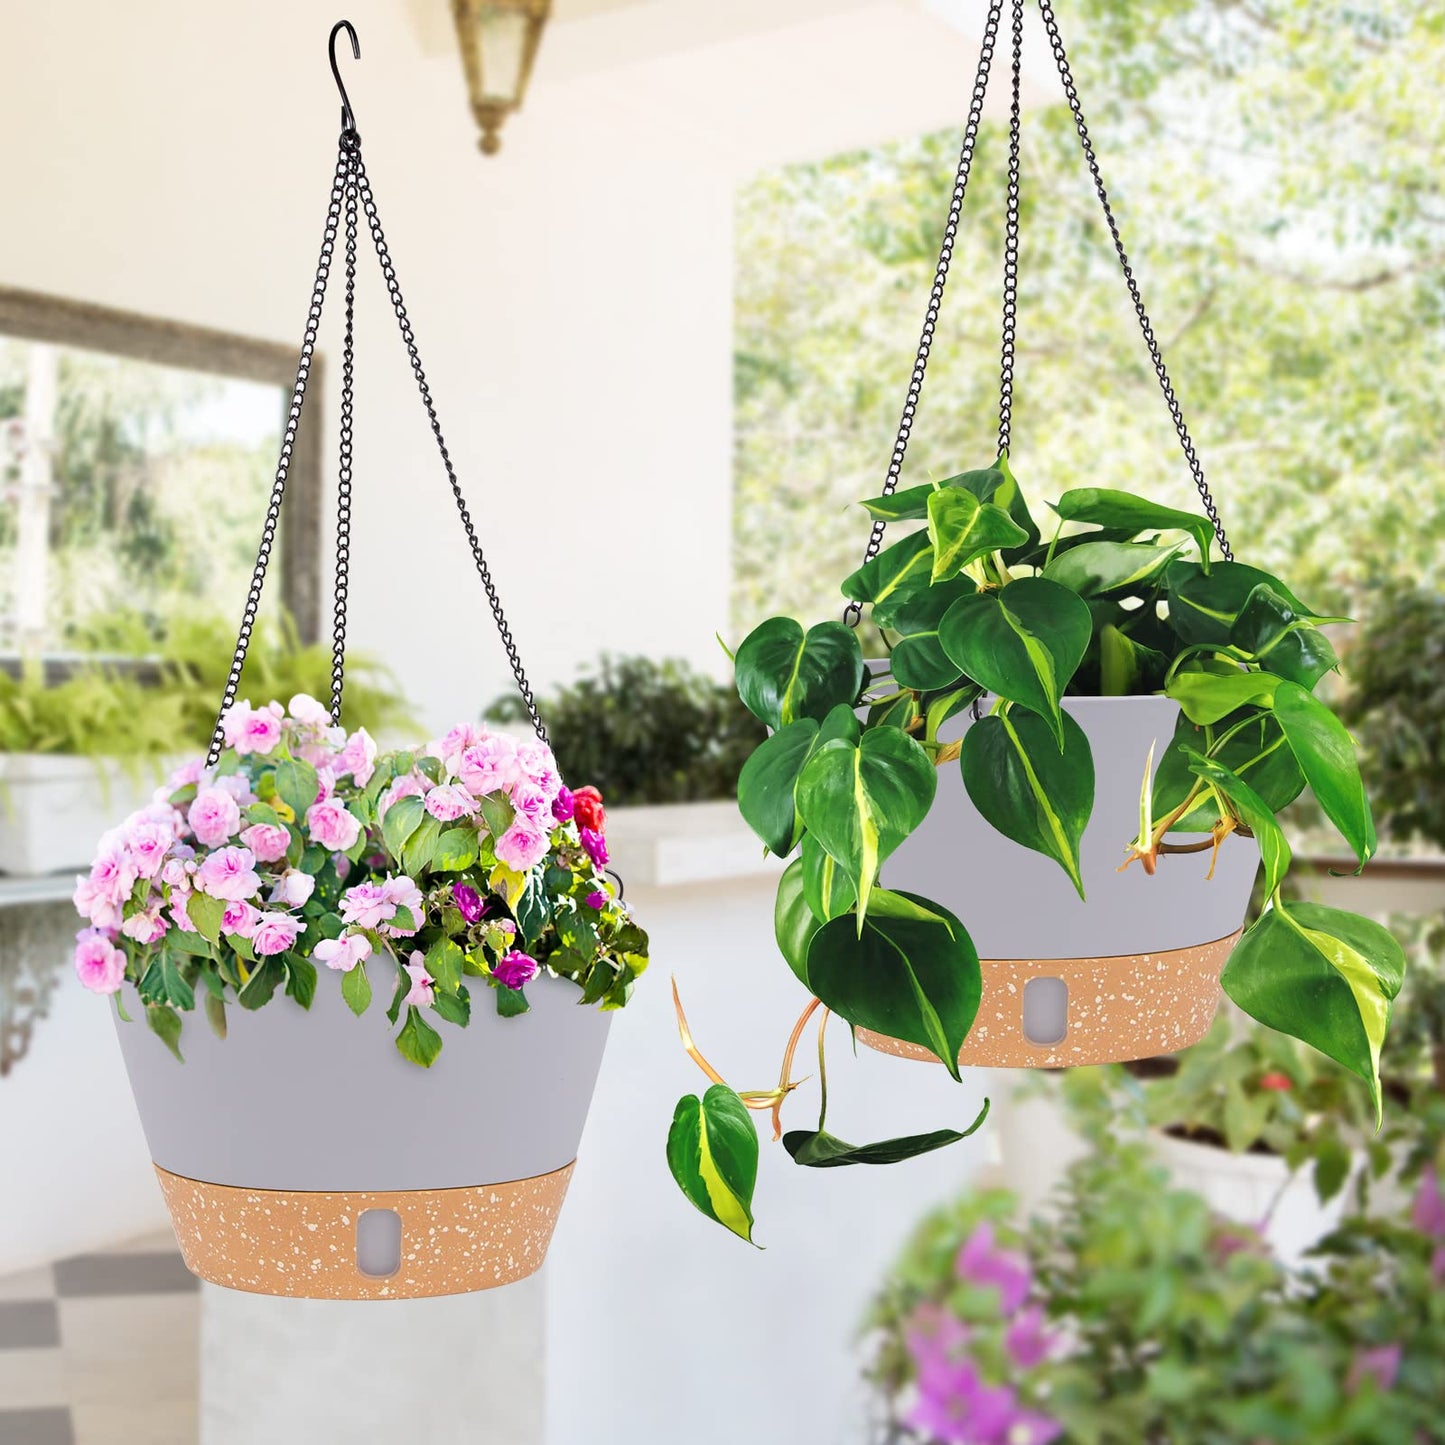 QCQHDU 2 Pack Hanging Planters Set,8 Inch Indoor Outdoor Hanging Plant Pot Basket,Hanging Flower Pot with Drainage Hole with 3 Hooks for Garden Home(Light Grey)